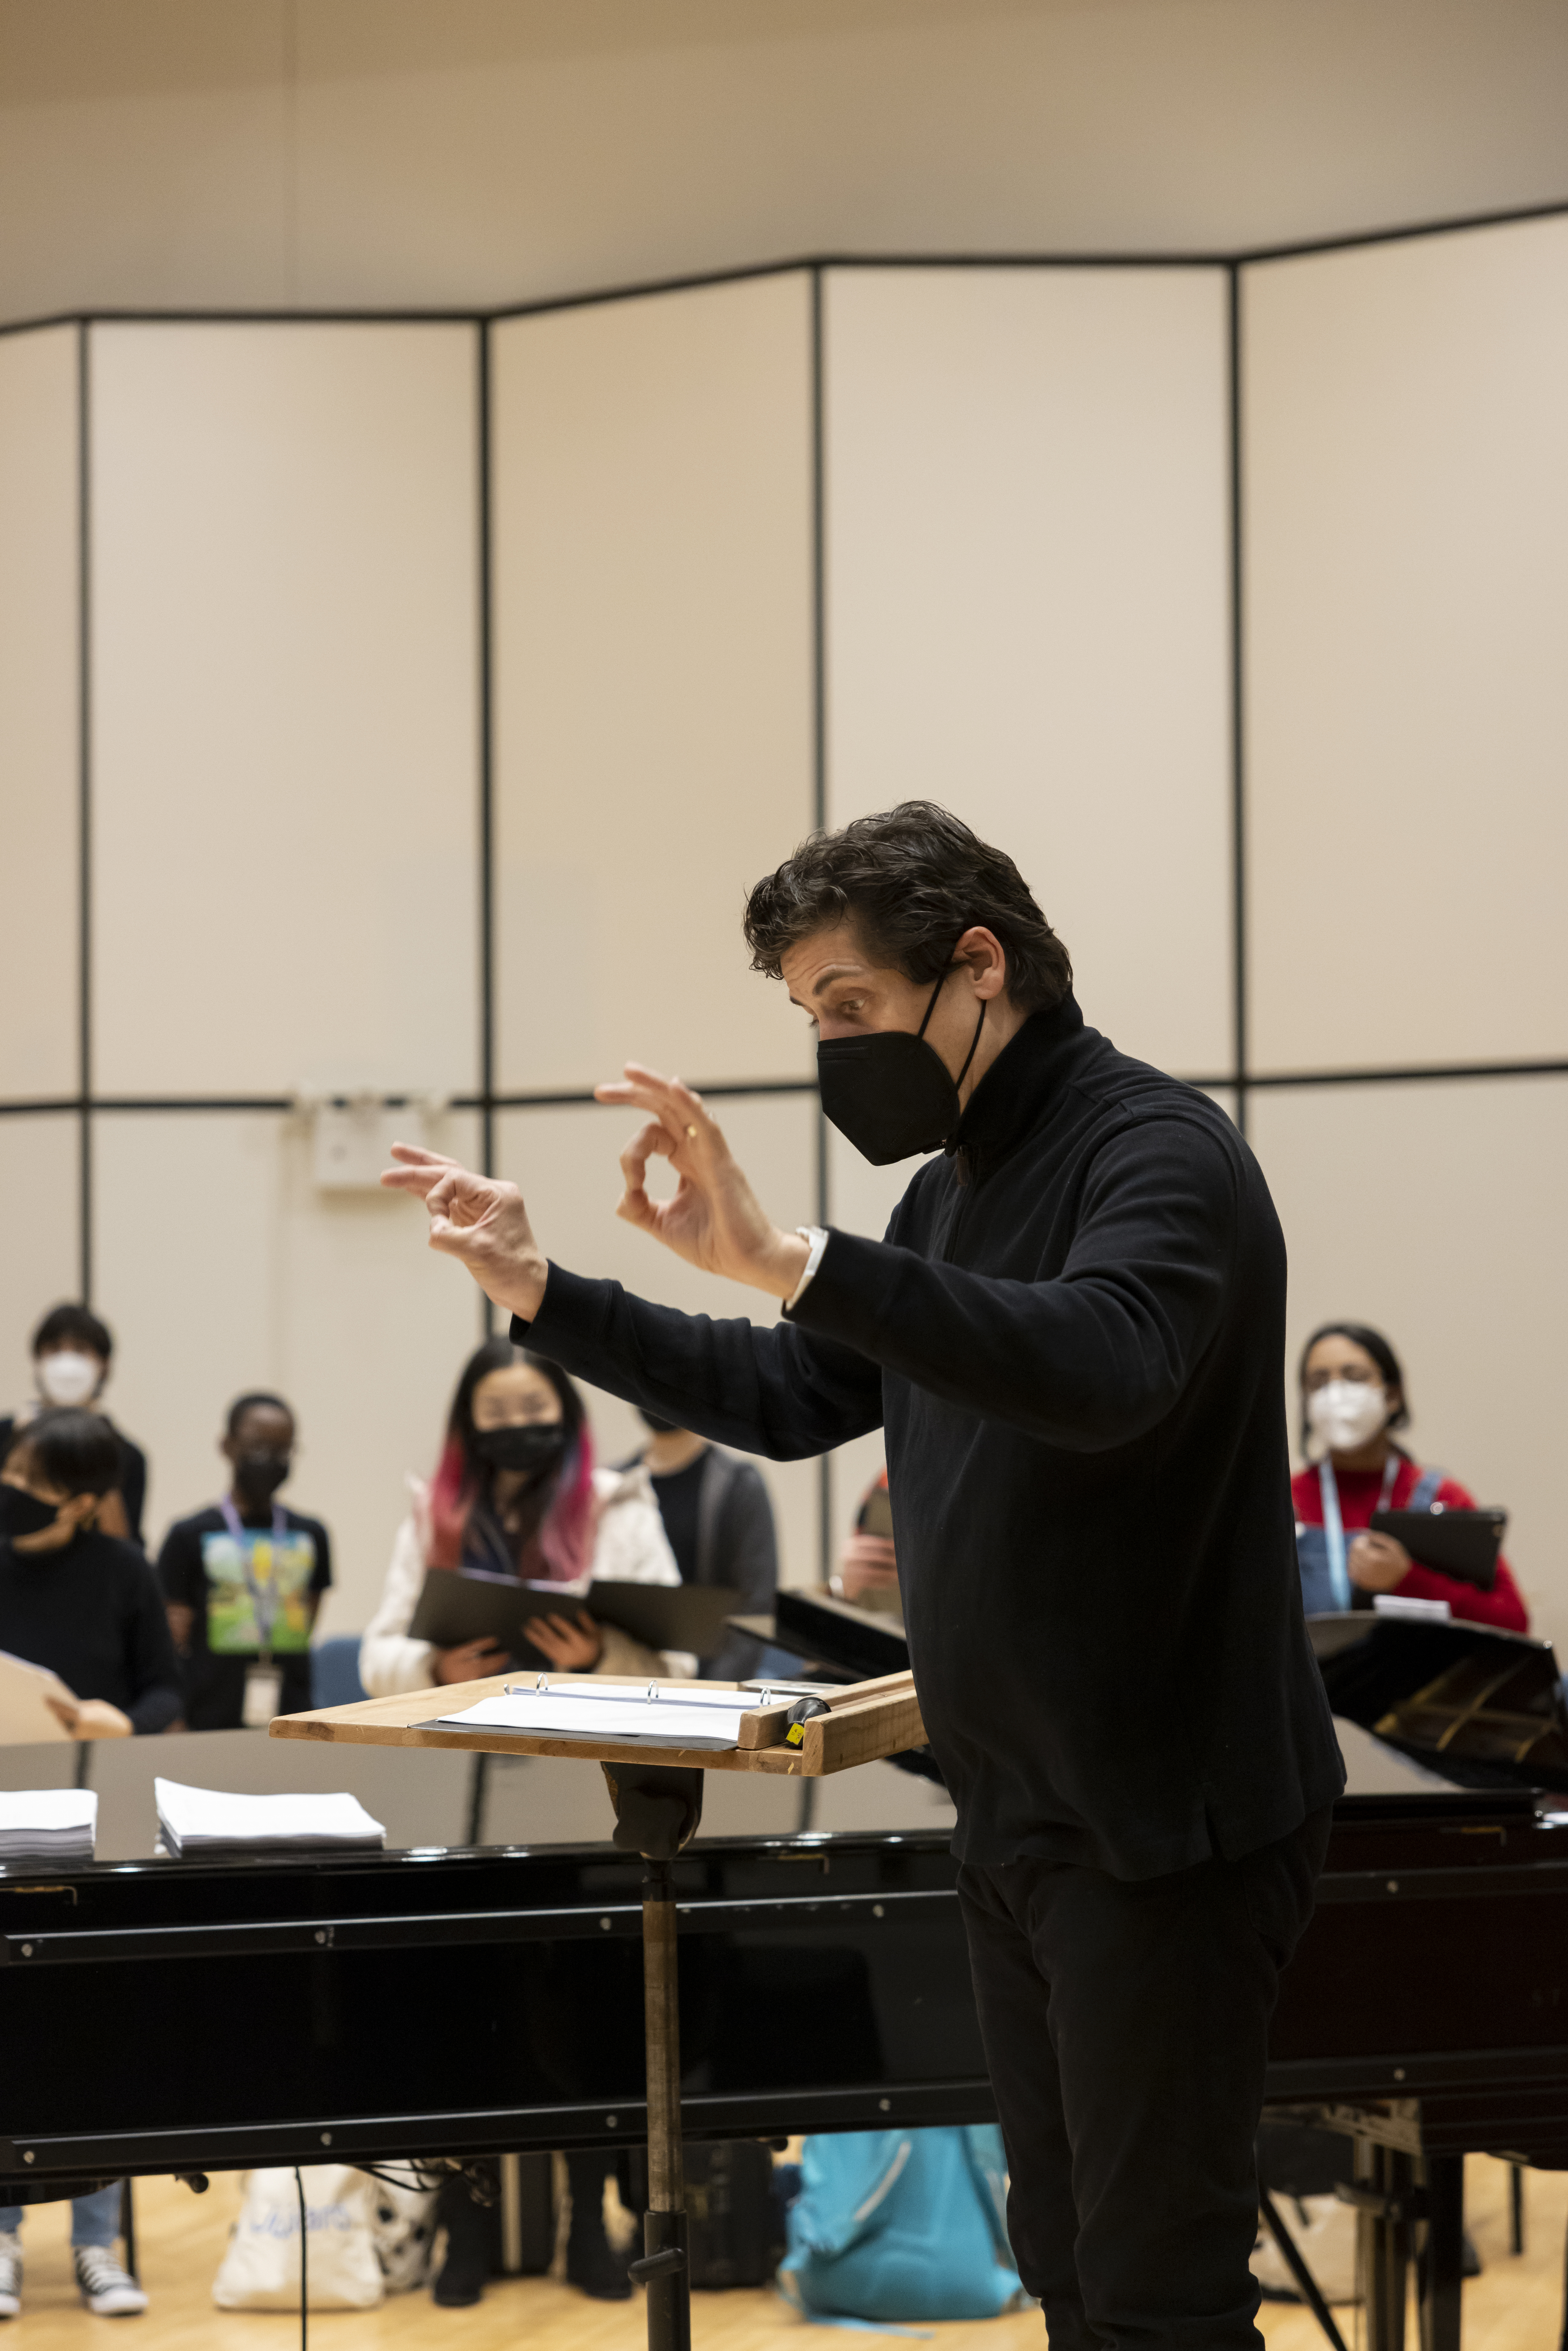 Francisco Nuñez is conducting MAP musicians during rehearsal in a candid photograph